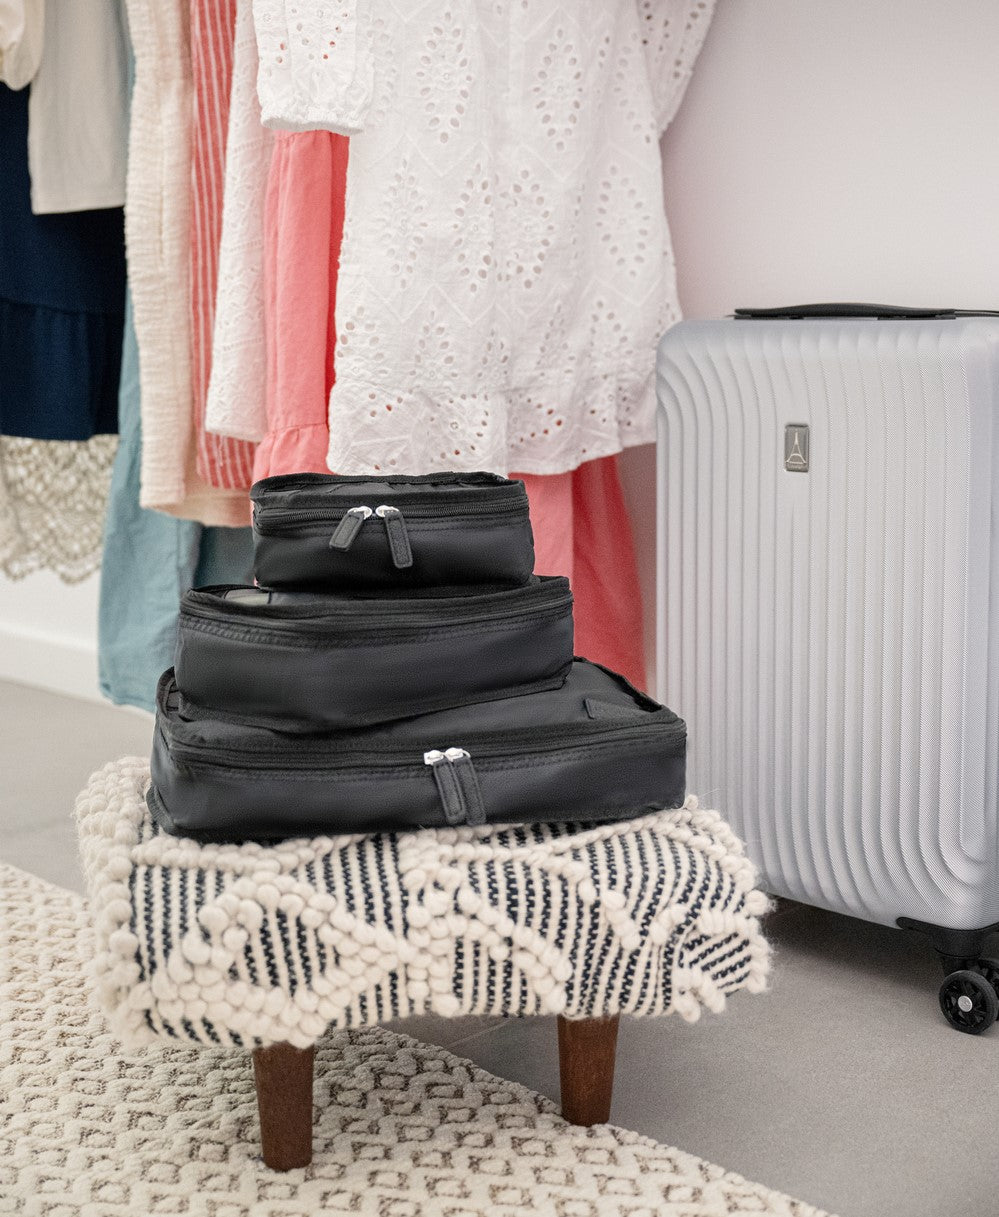 How to Store and Organize Luggage & Travel Gear